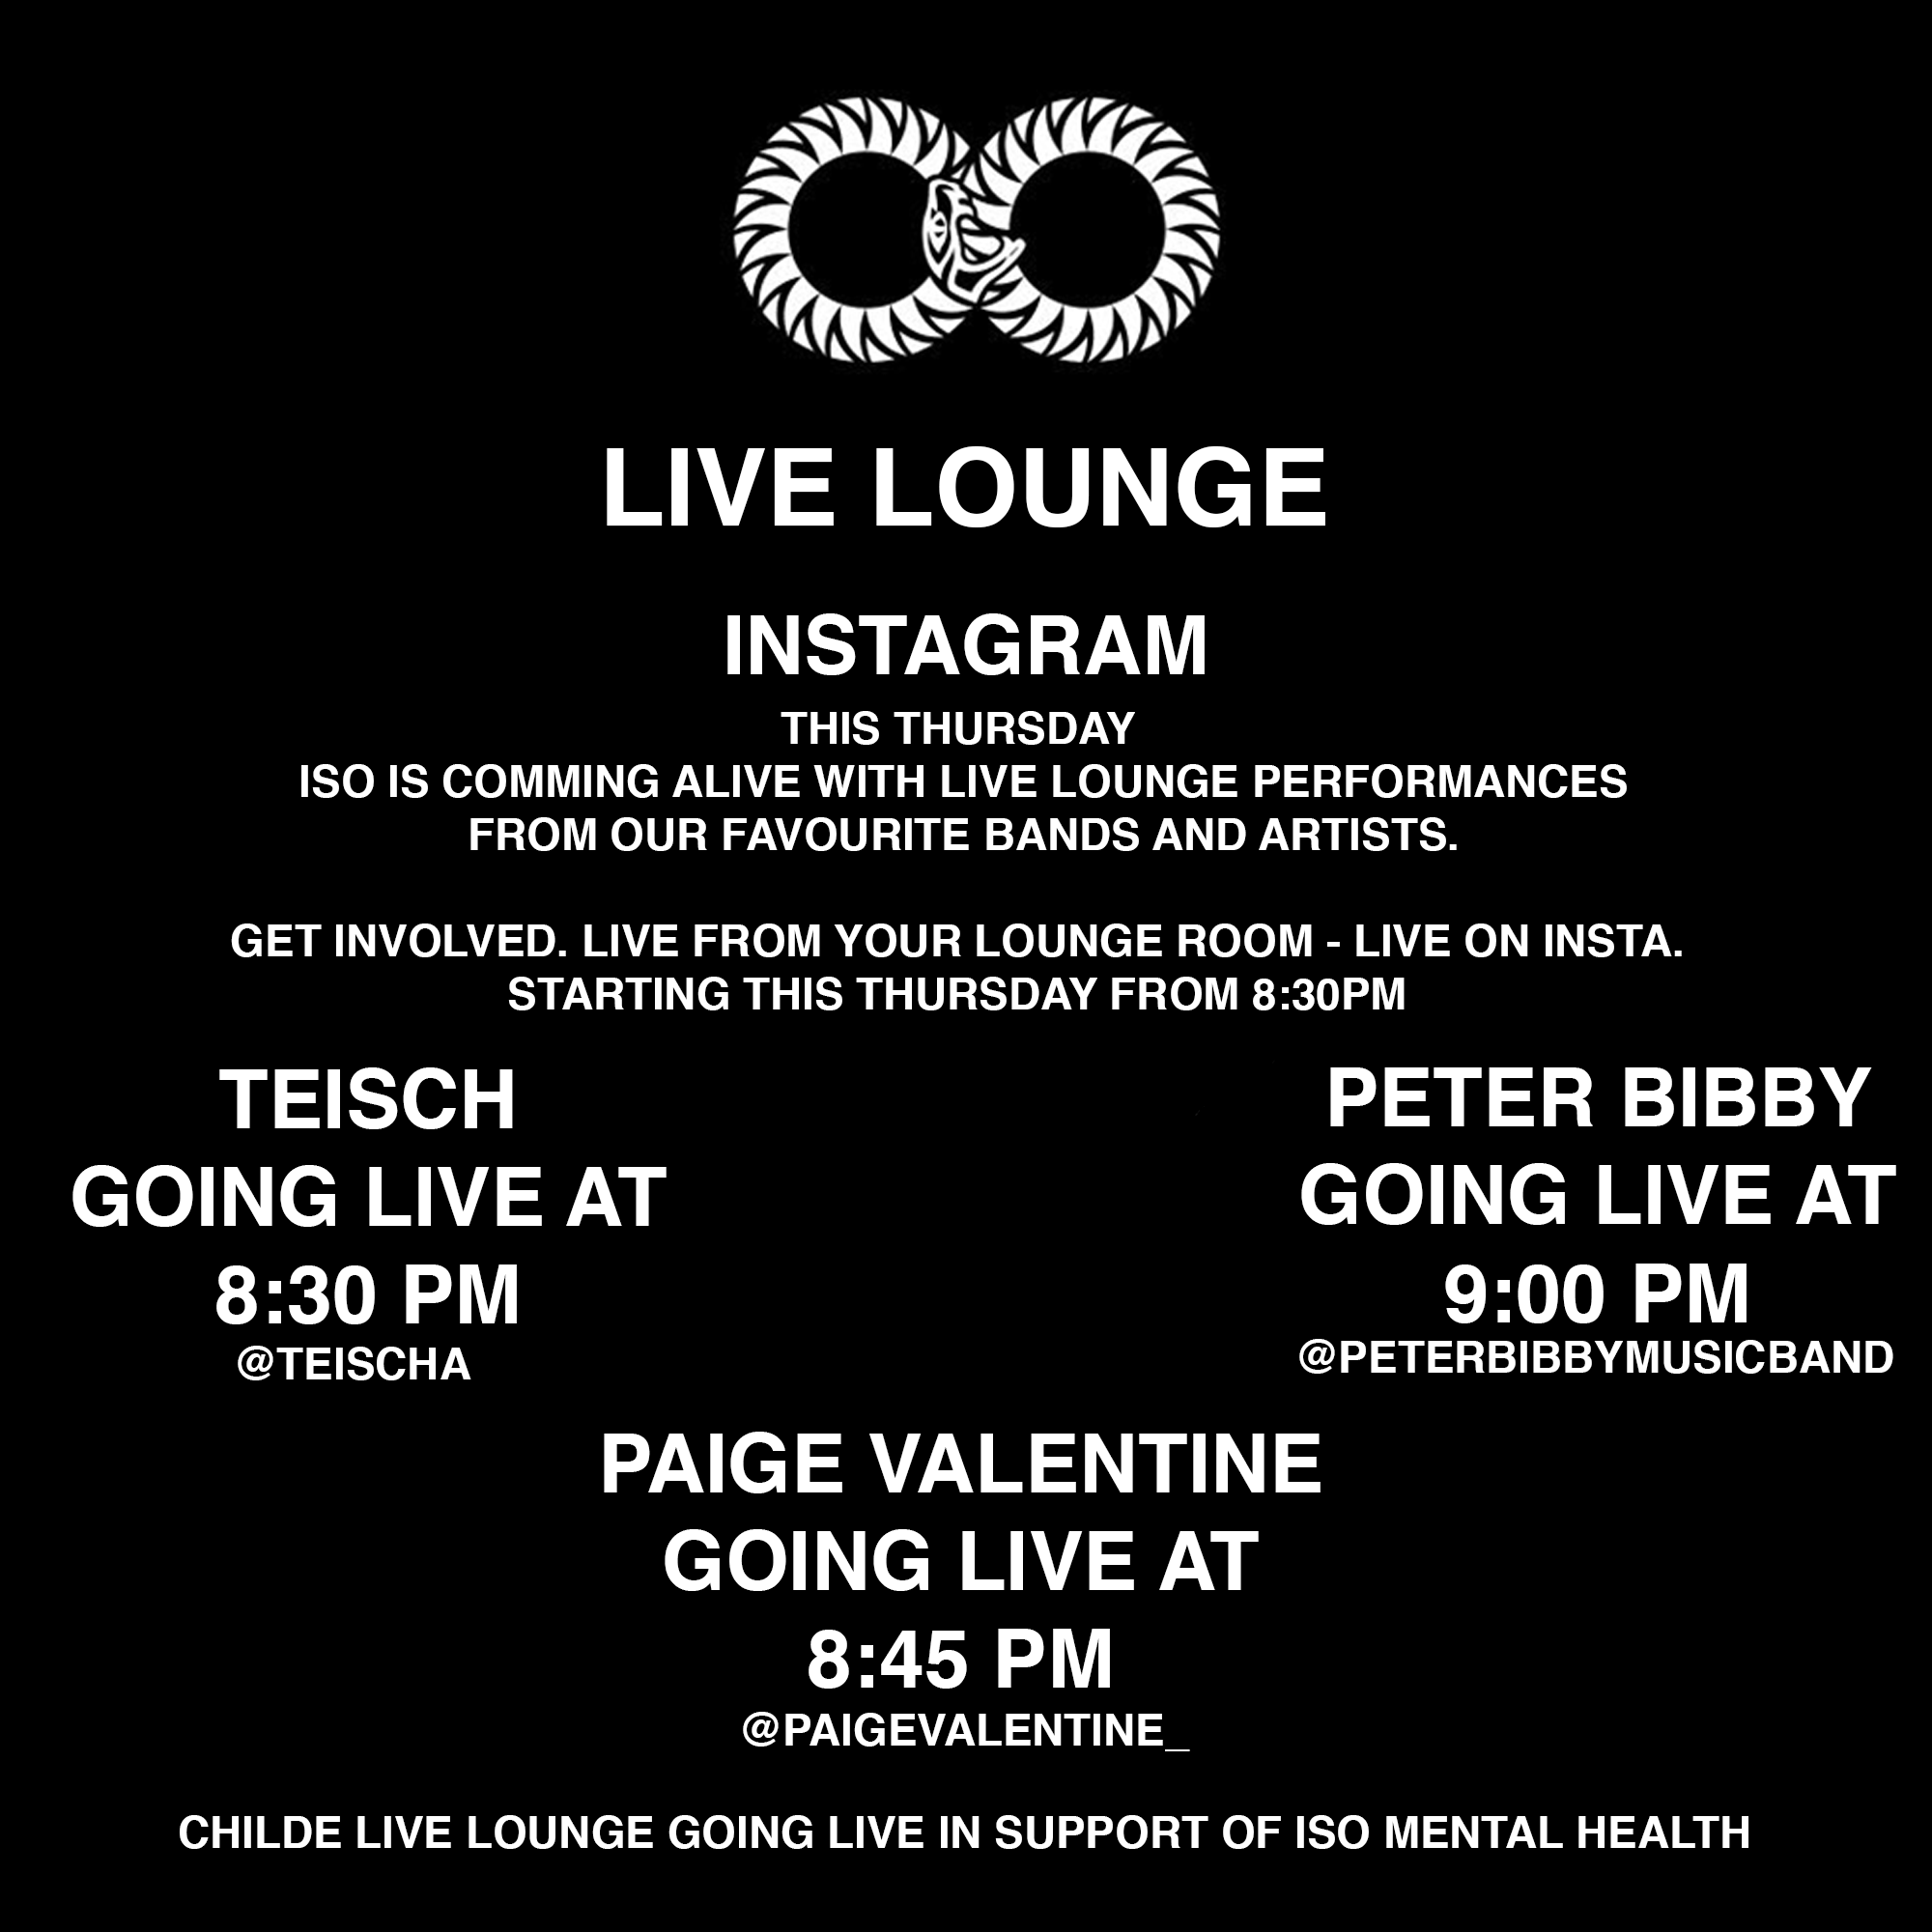 Childe Live Lounge in support of positive mental health